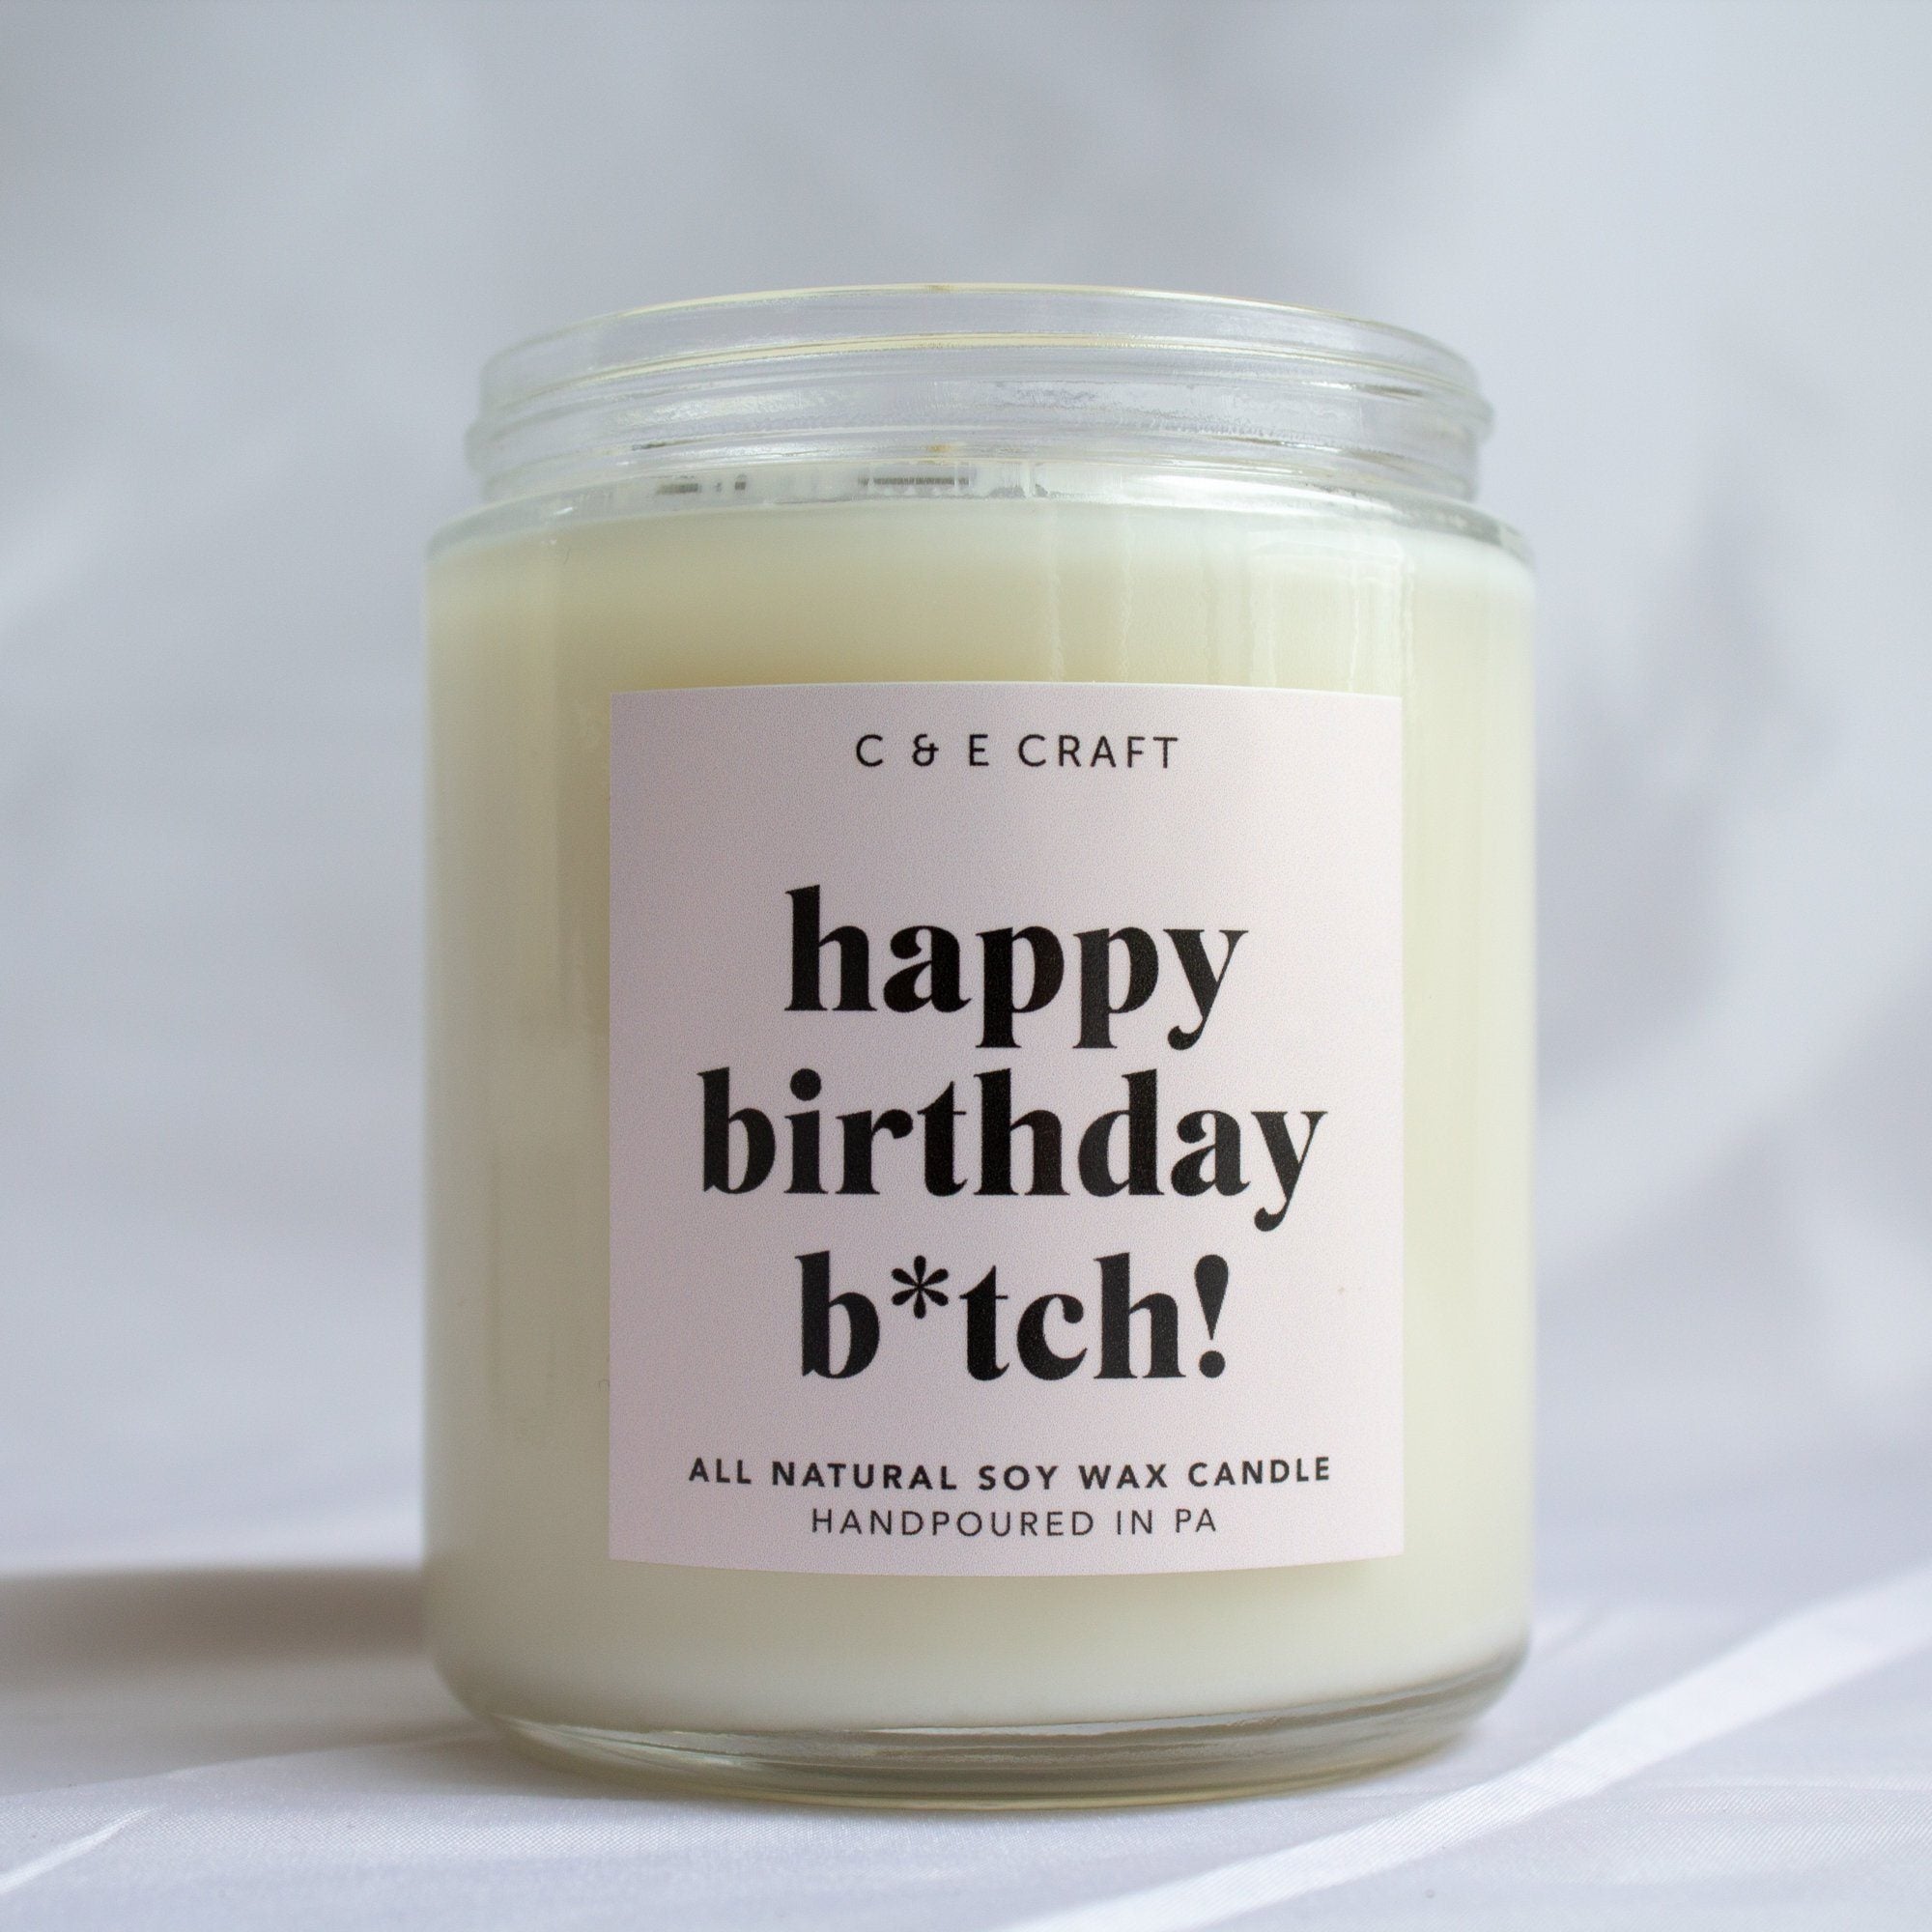 Go Shawty It's Your Birthday Candle – C & E Craft Co